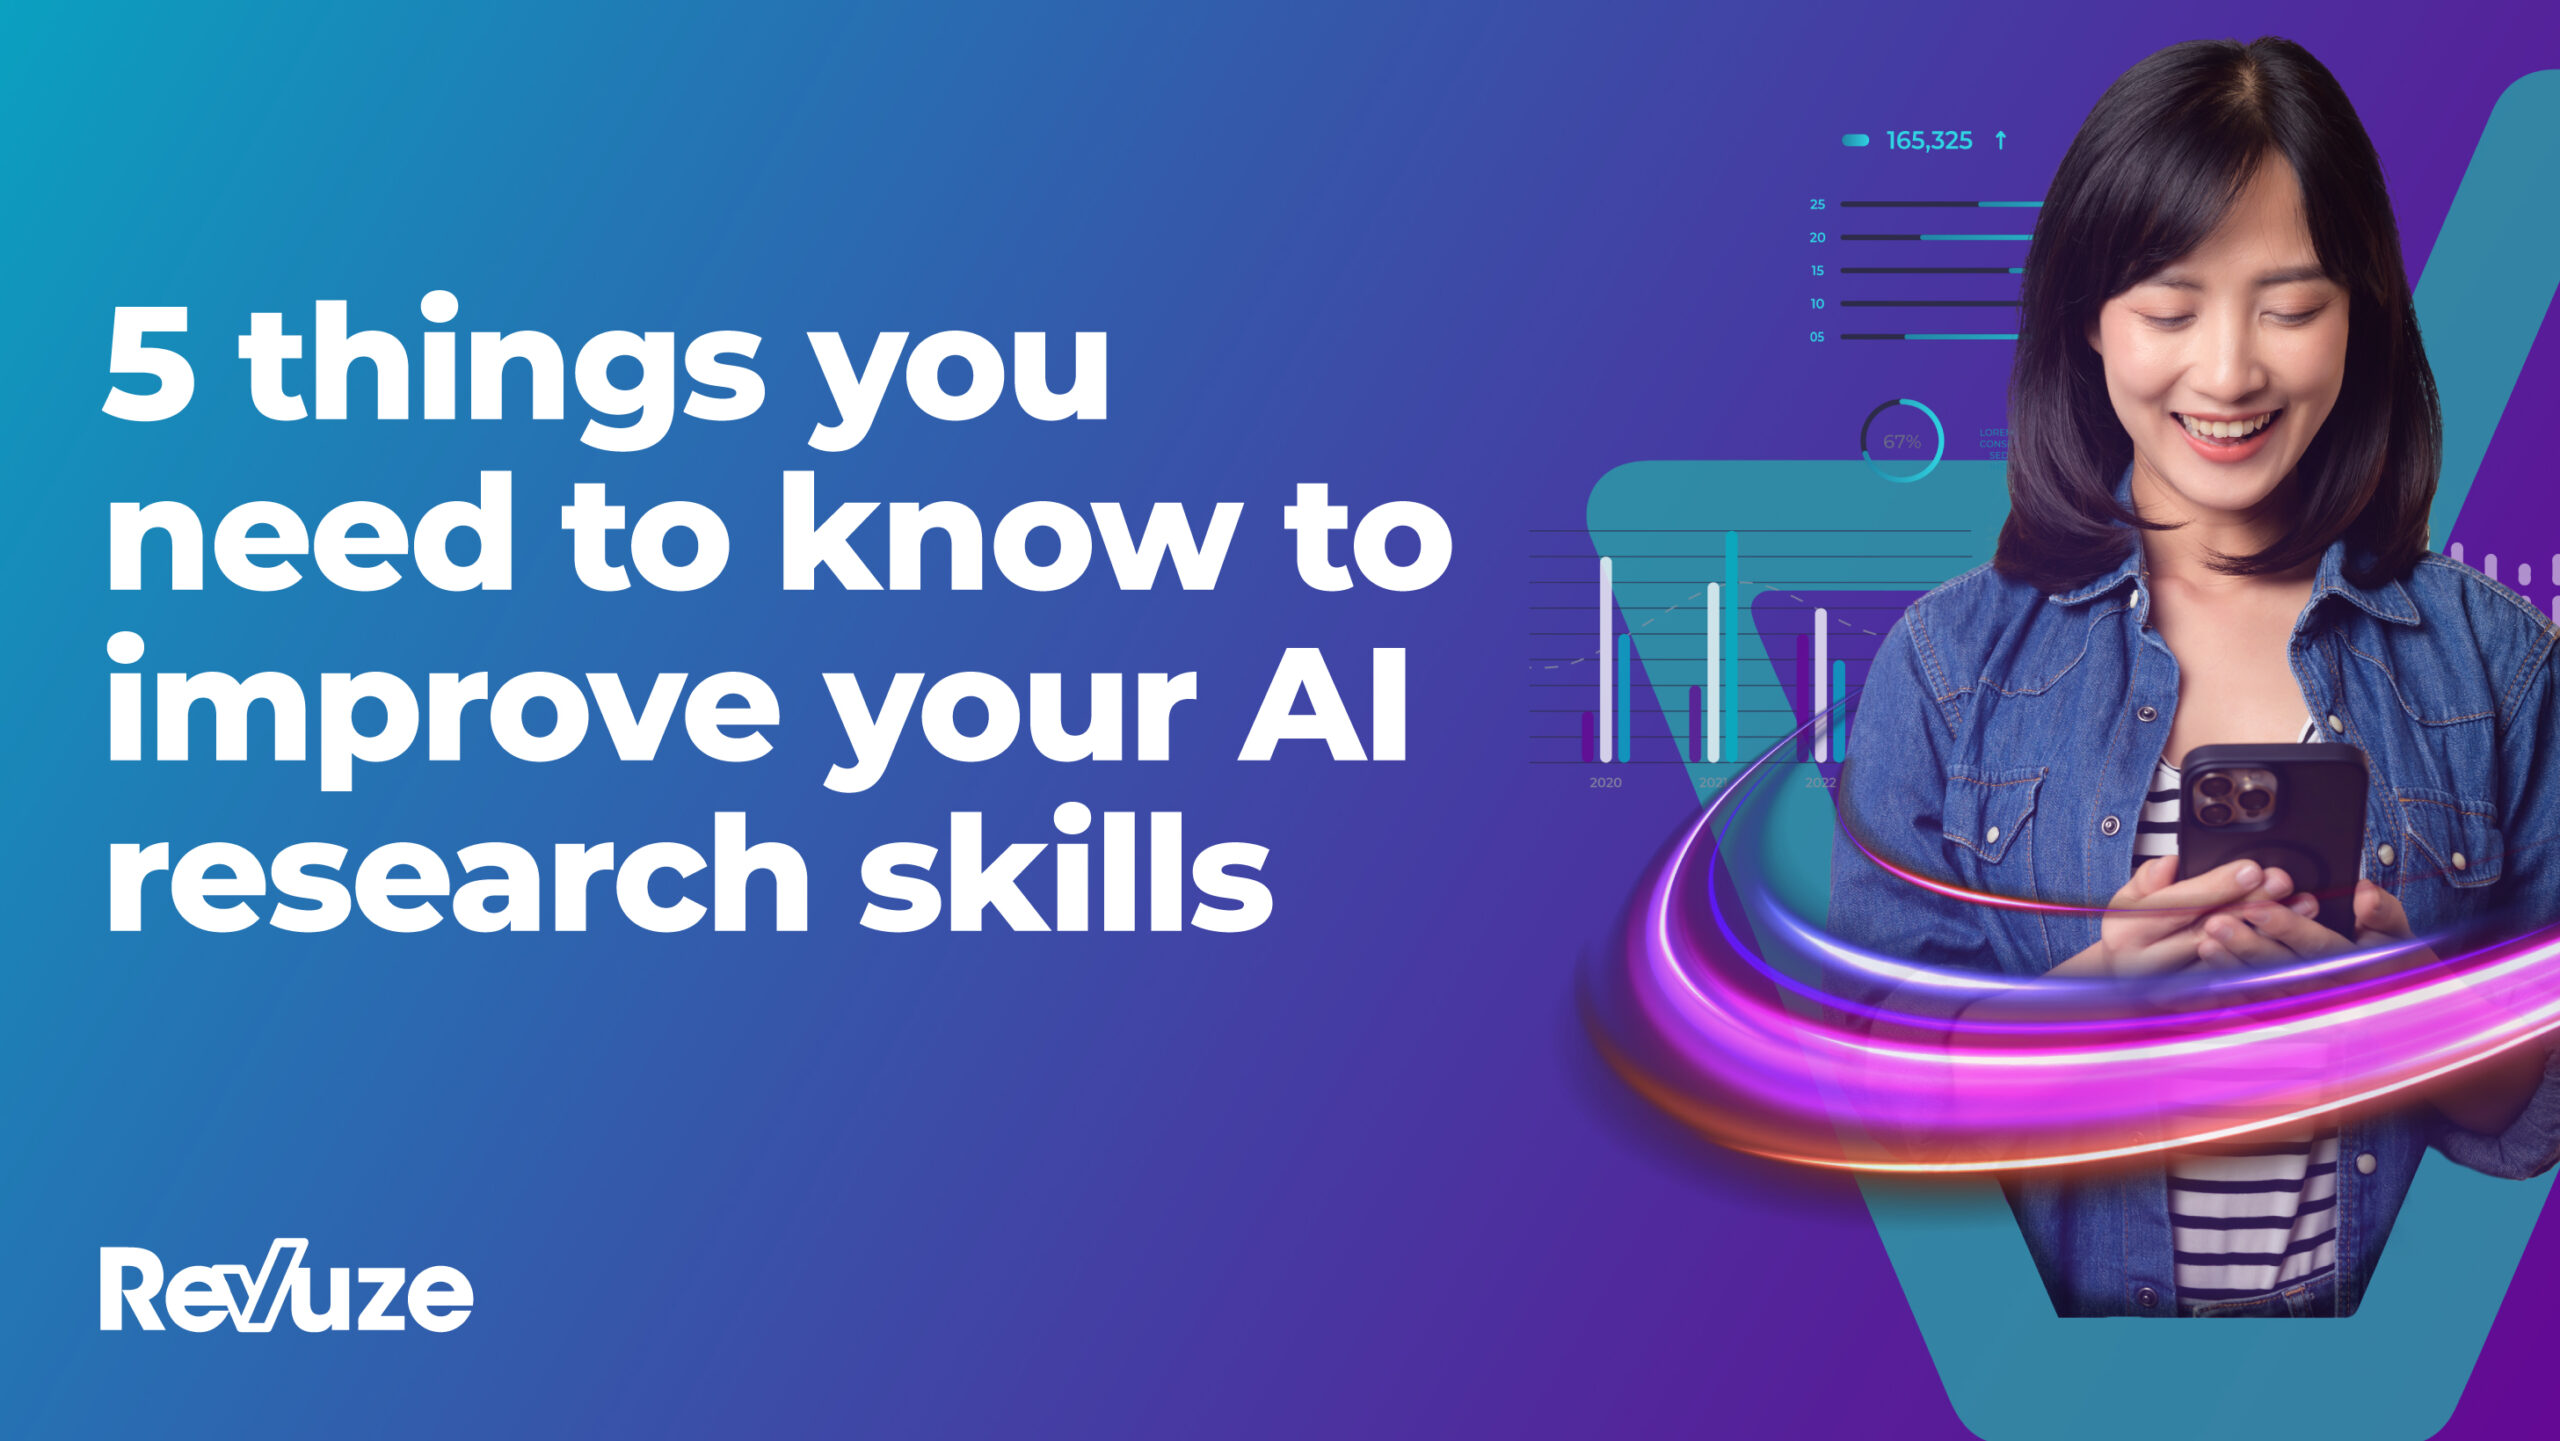 5 things you need to know to improve your AI research skills